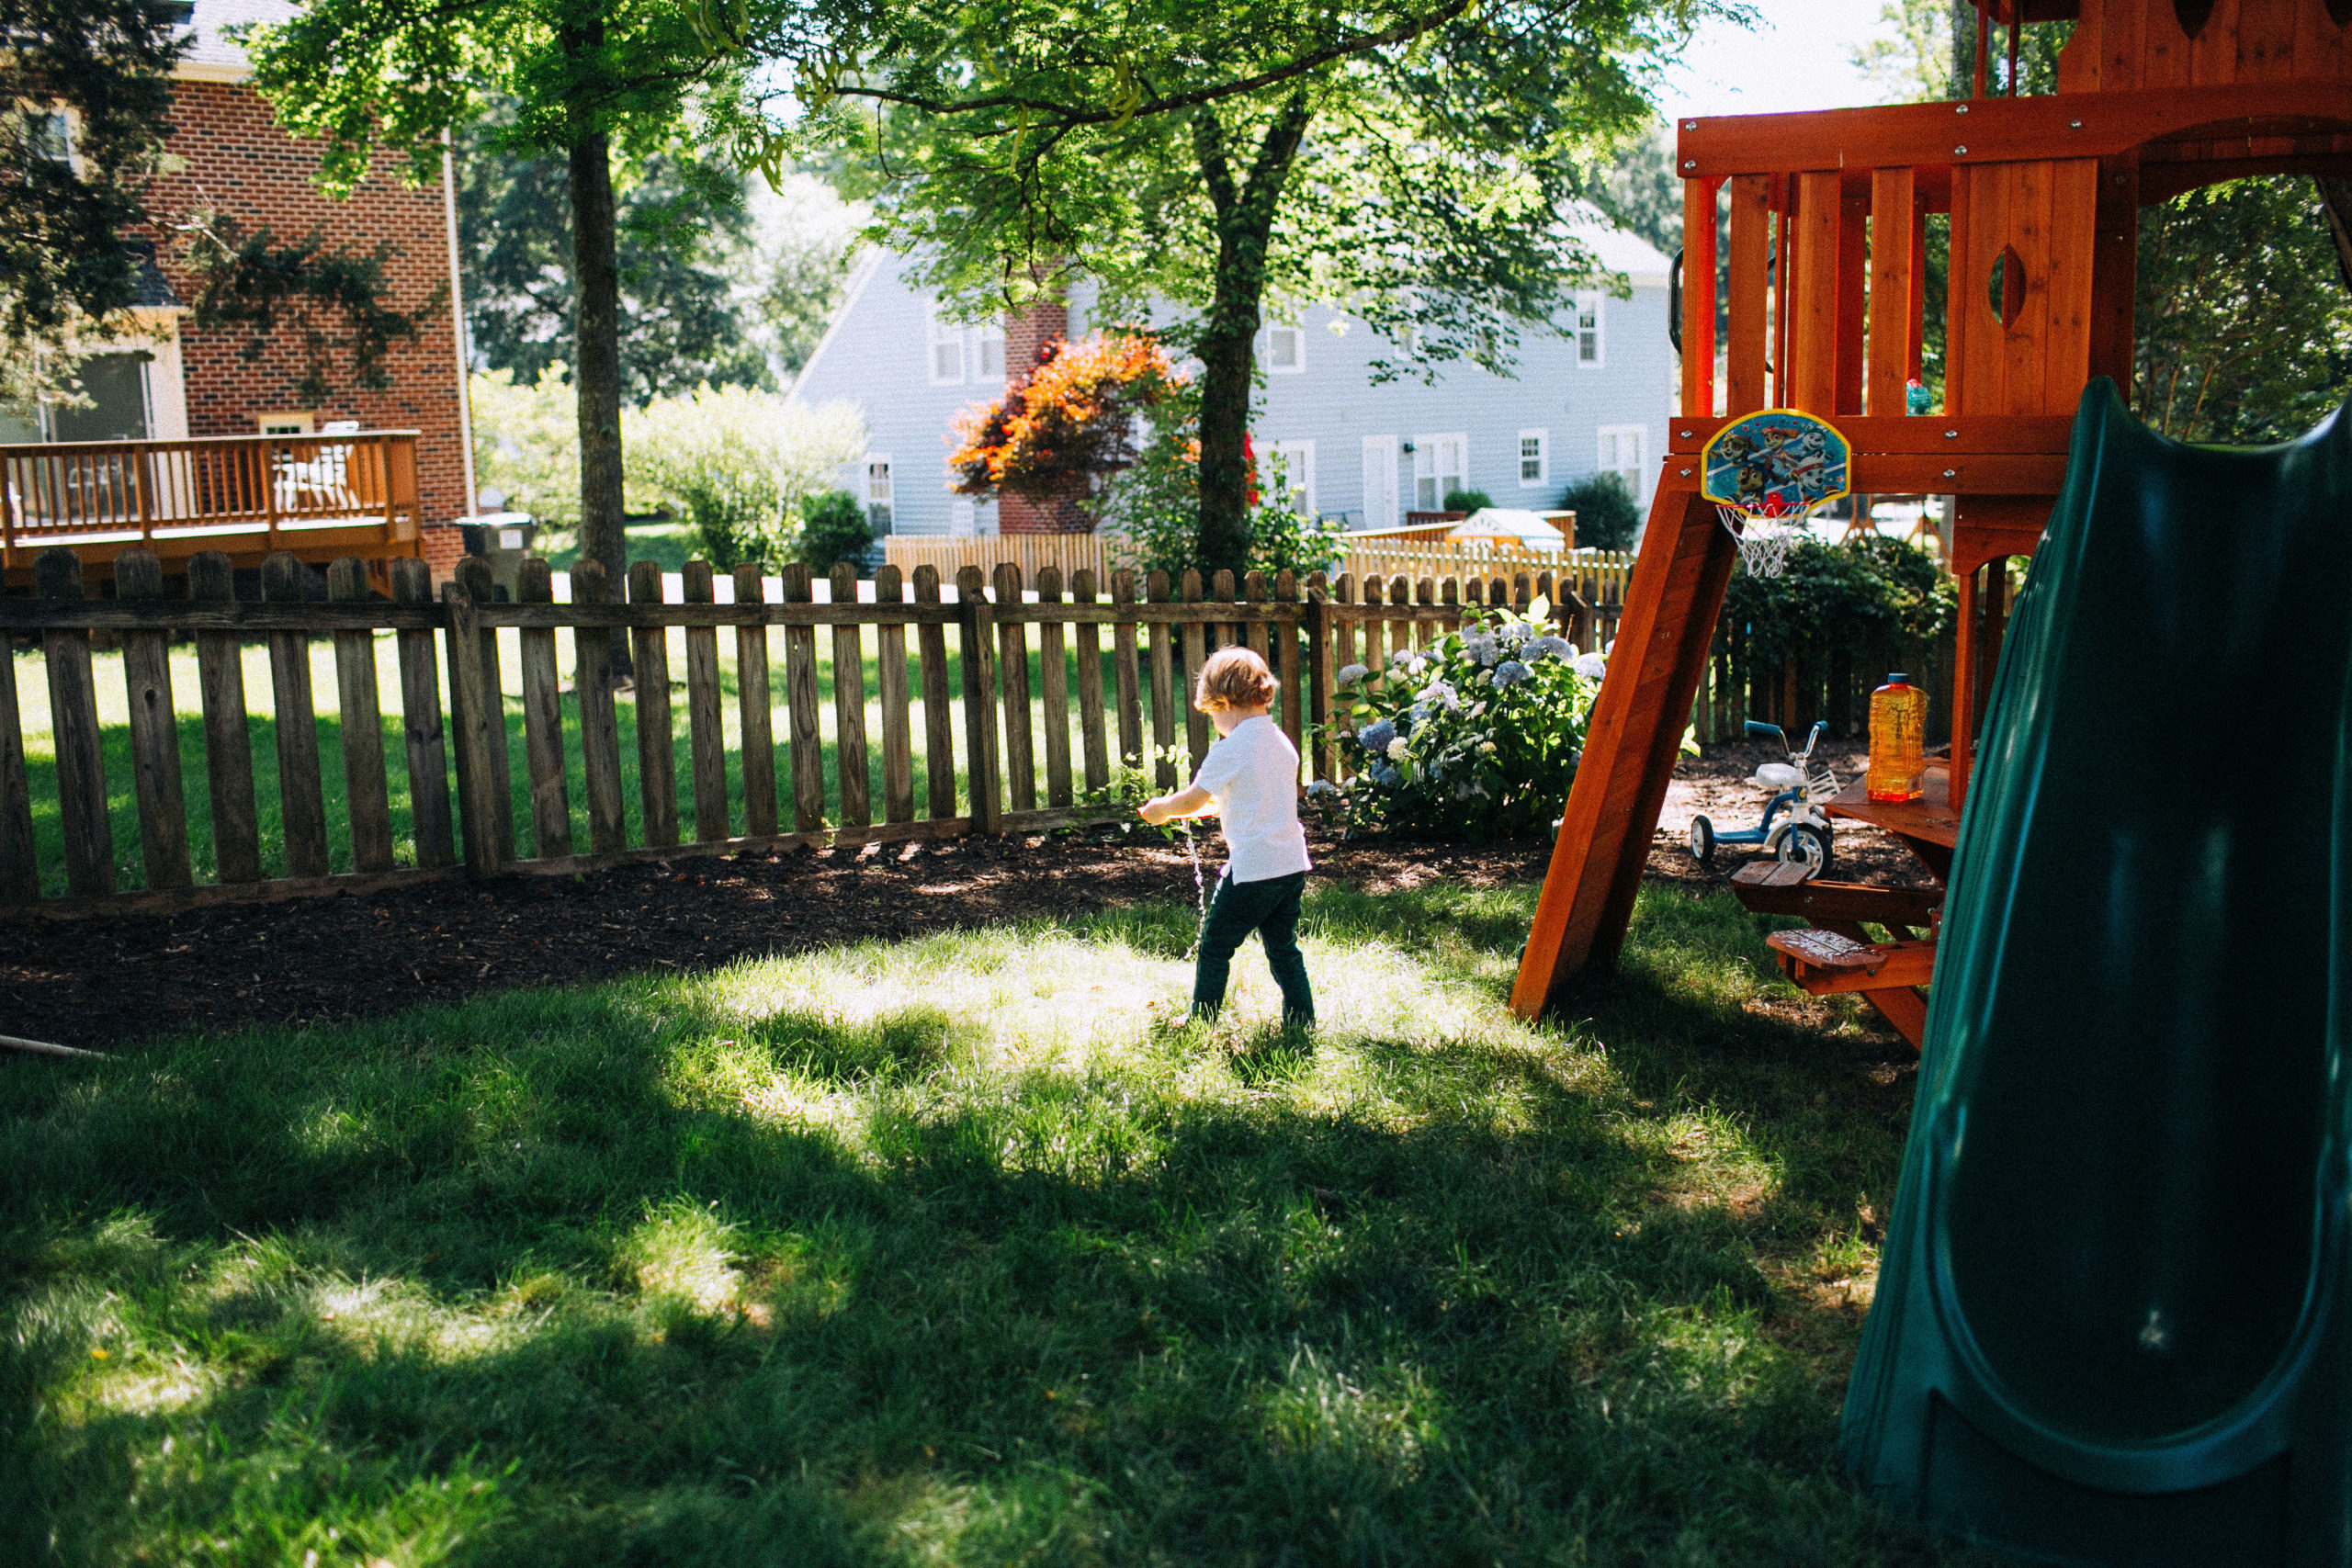 Image child in his back yard playing with a toy